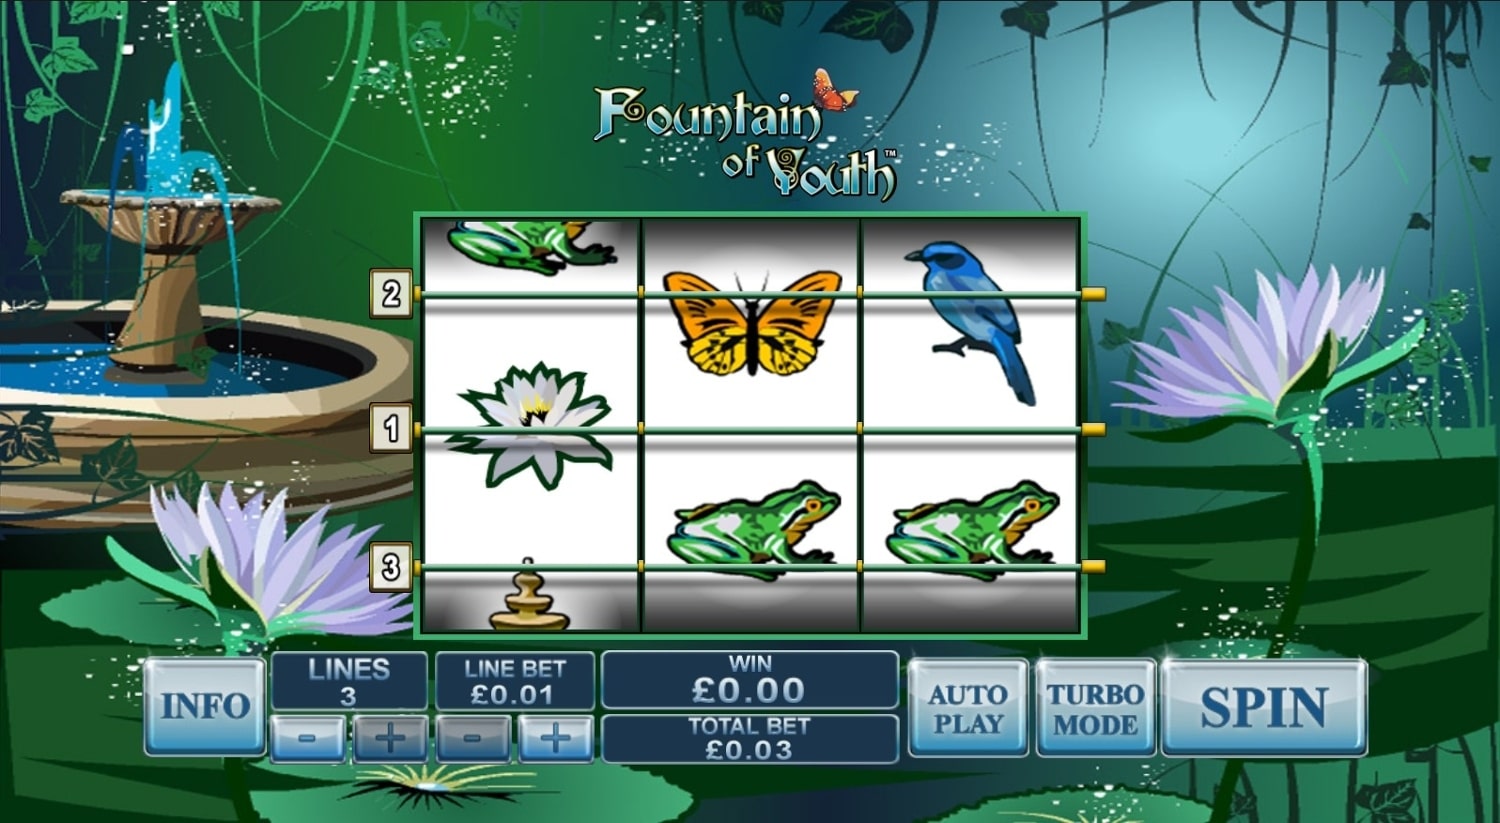 Fourtain of Youth Free Spins